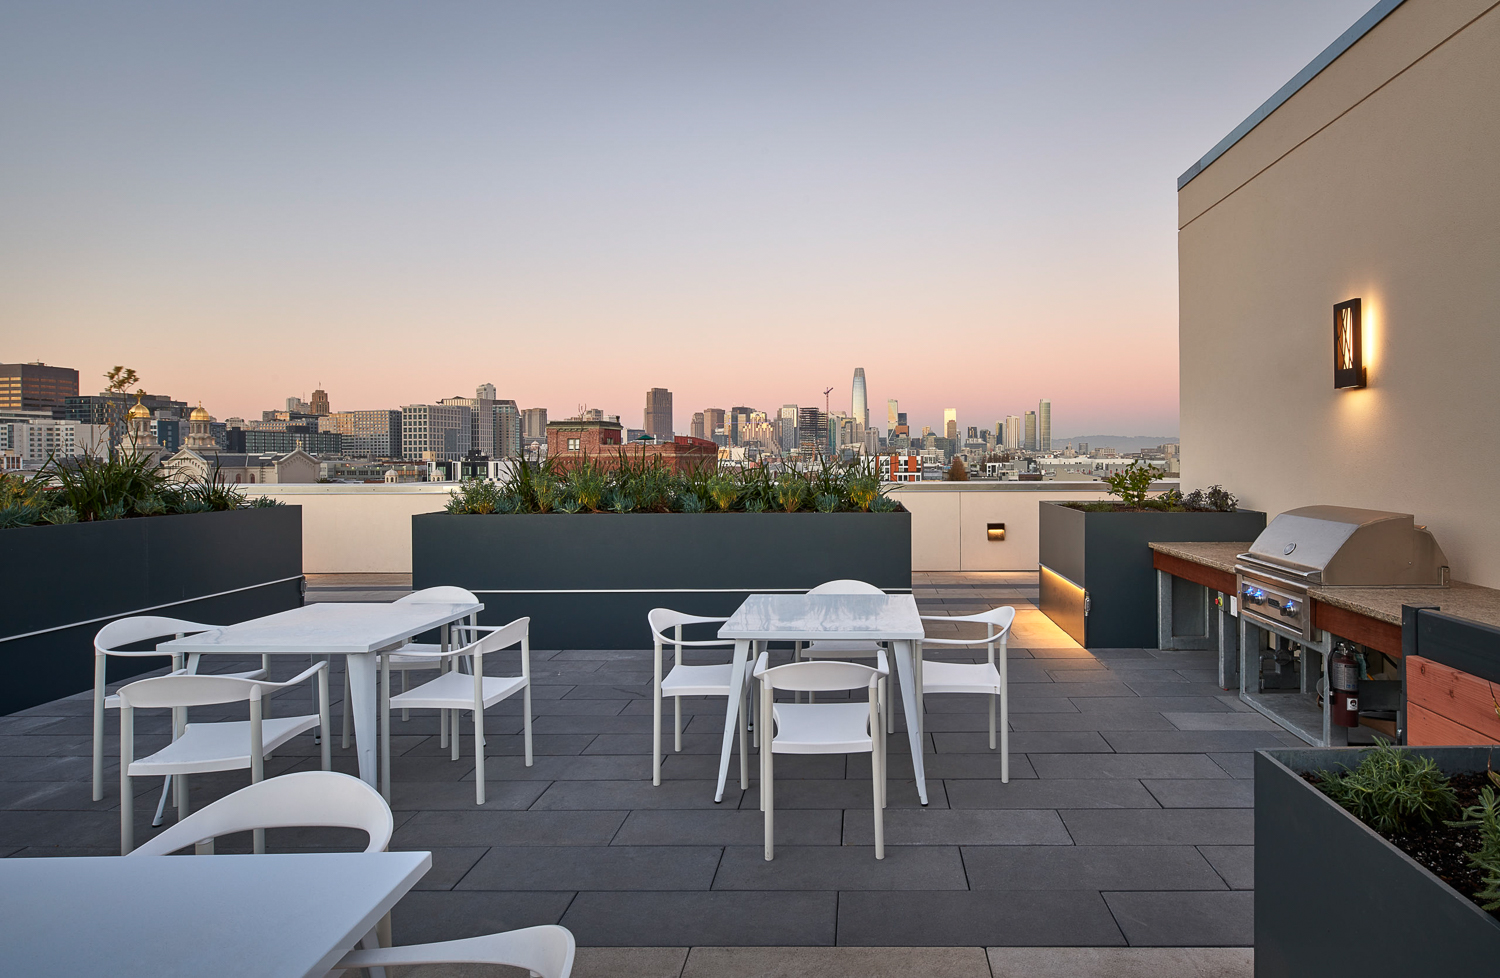 333 12th Street rooftop garden and seating with views of the San Francisco skyline, image courtesy Panoramic